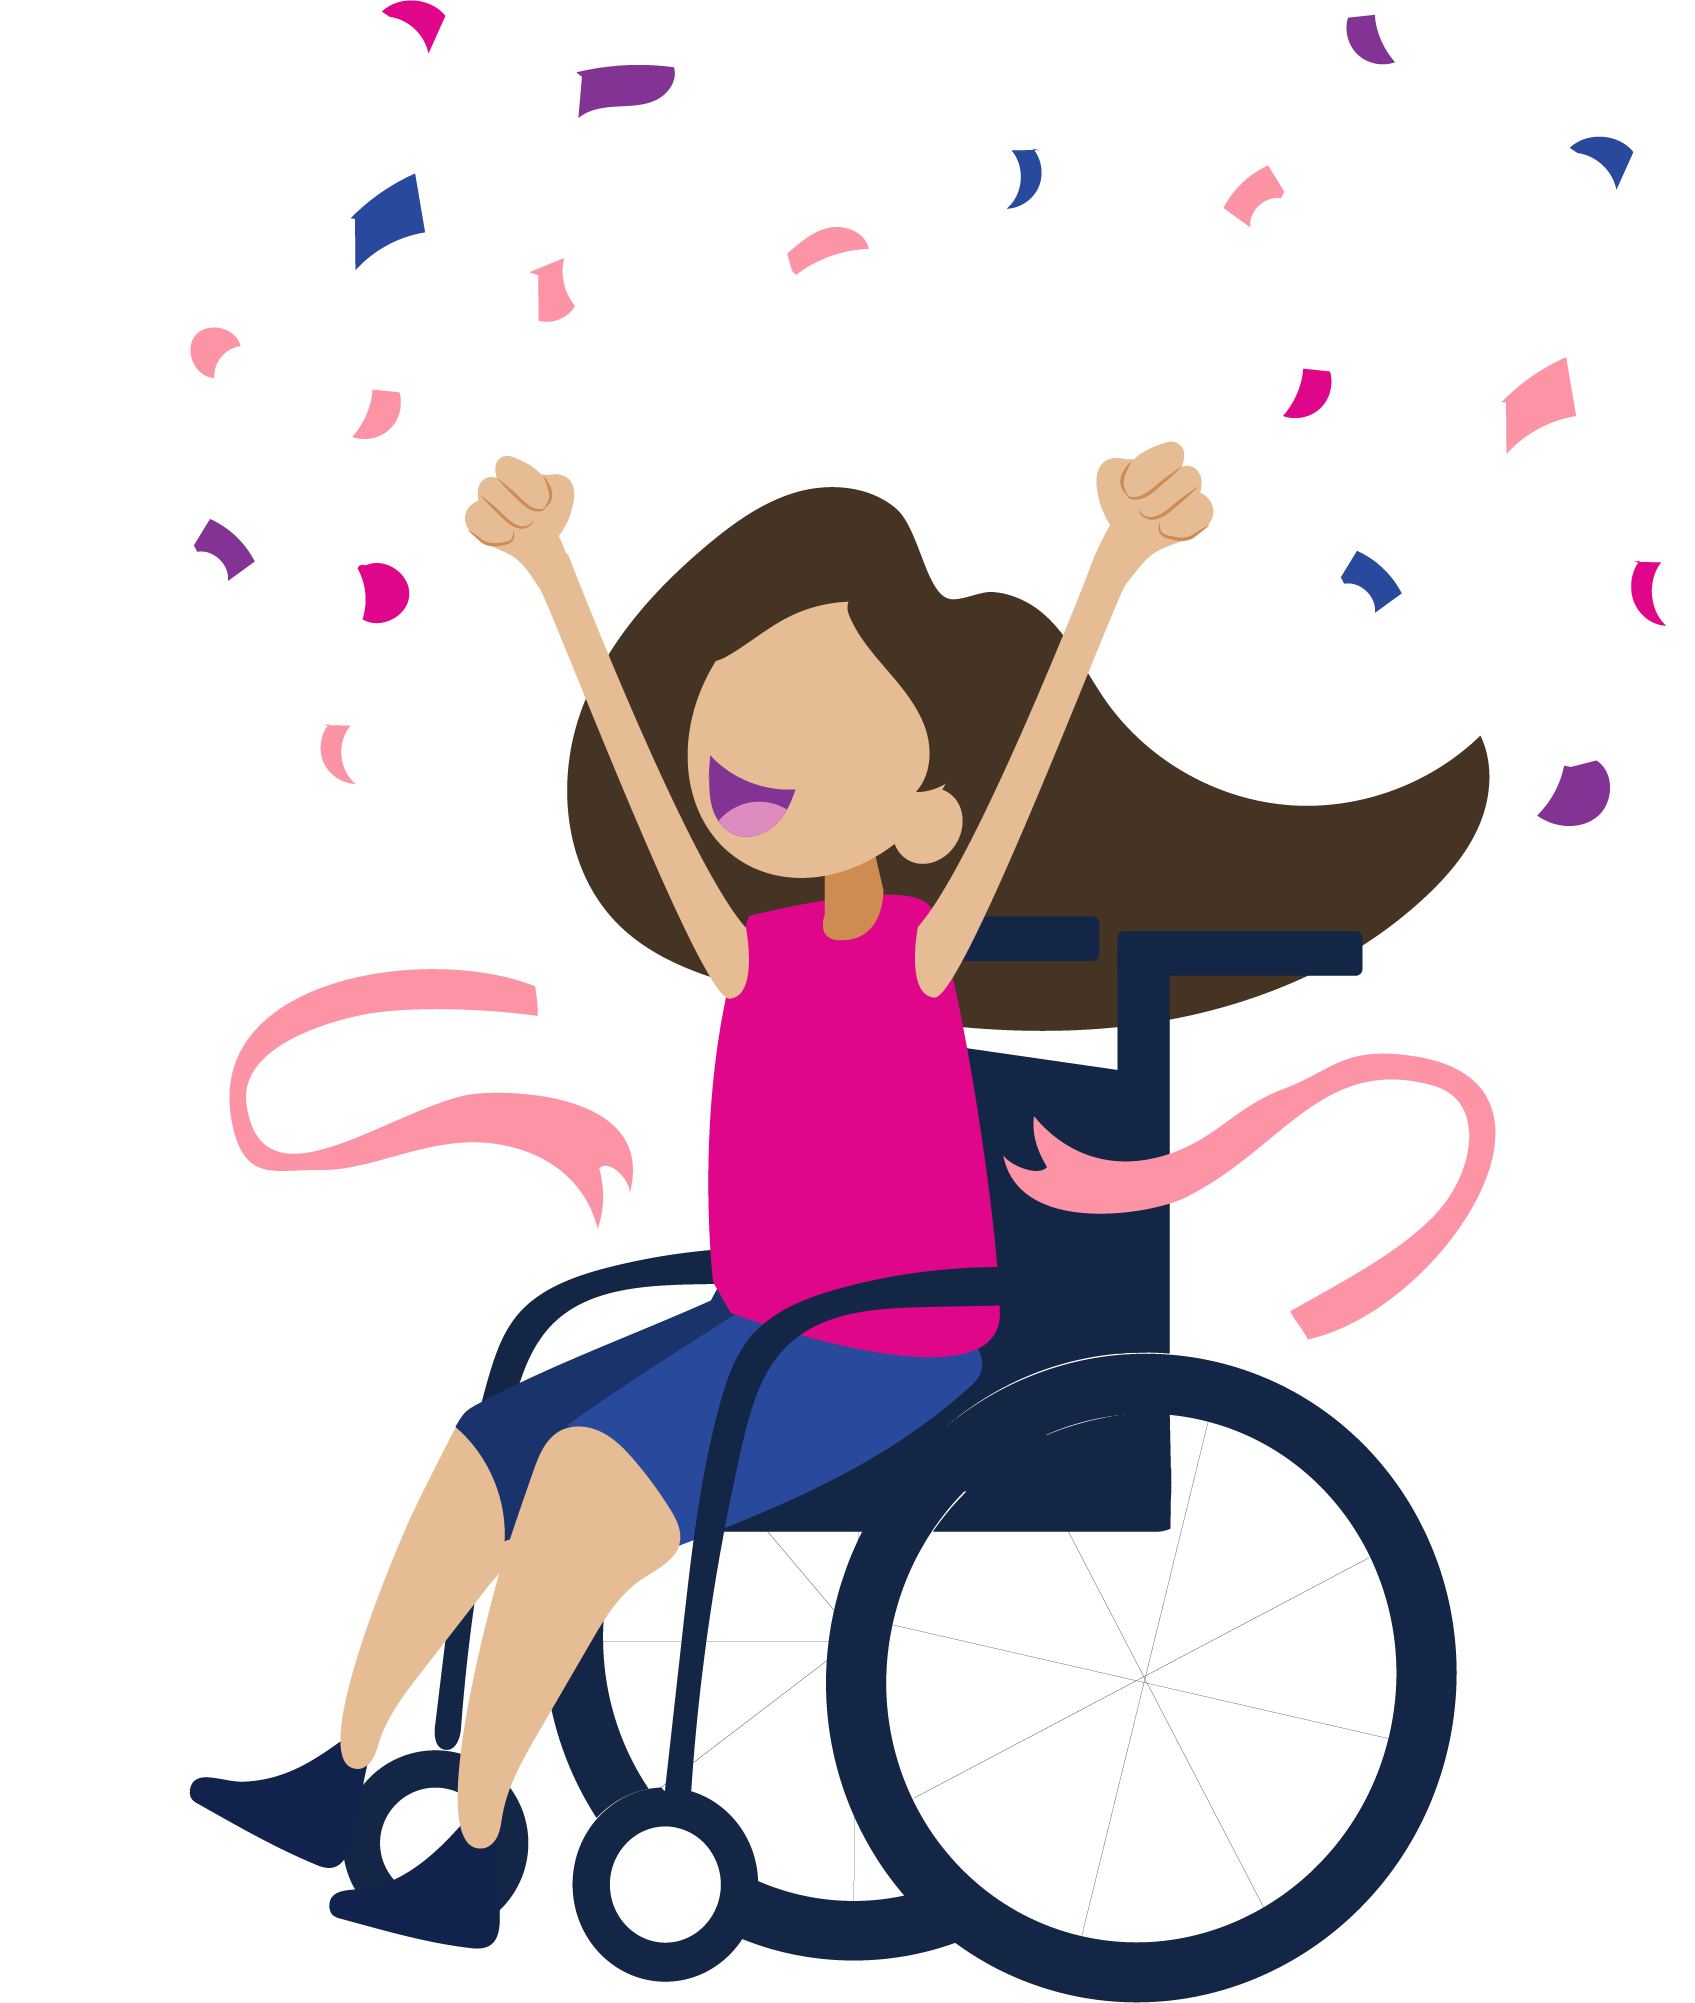 Illustration of a young girl celebrating in her wheelchair with confetti around her.